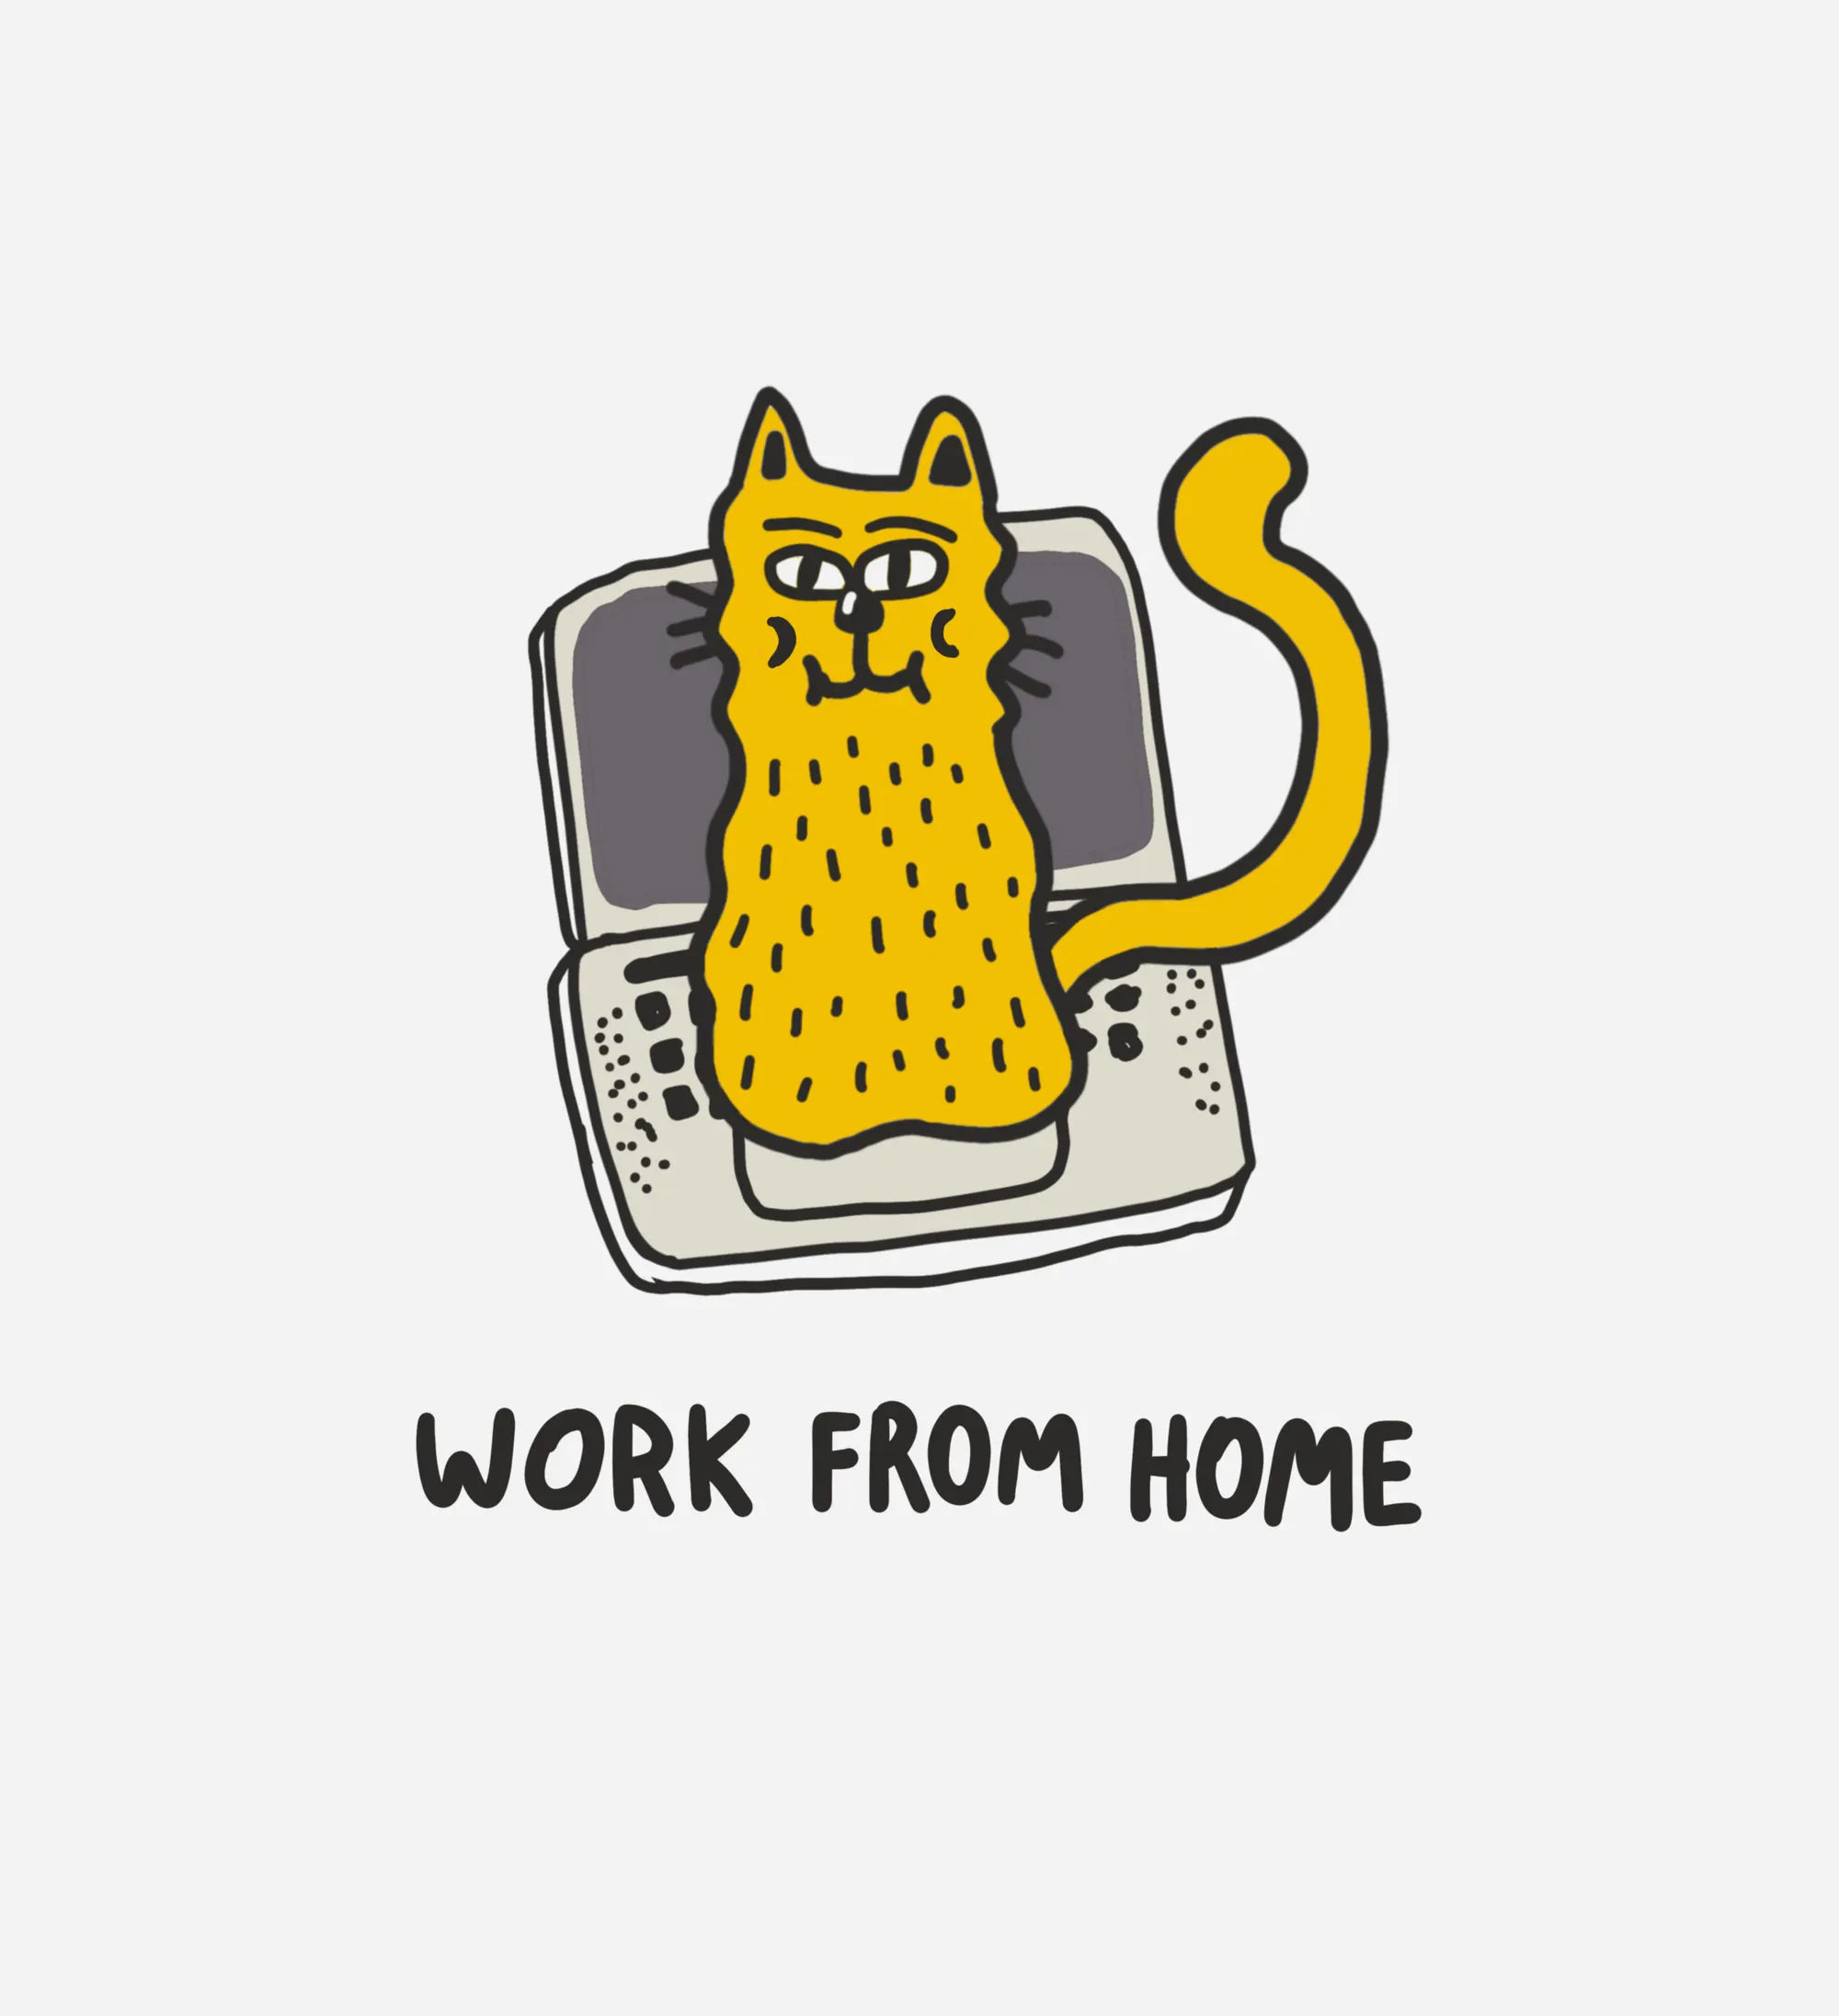 An illustration of a cat sitting on a laptop keyboard with the caption Work from Home.